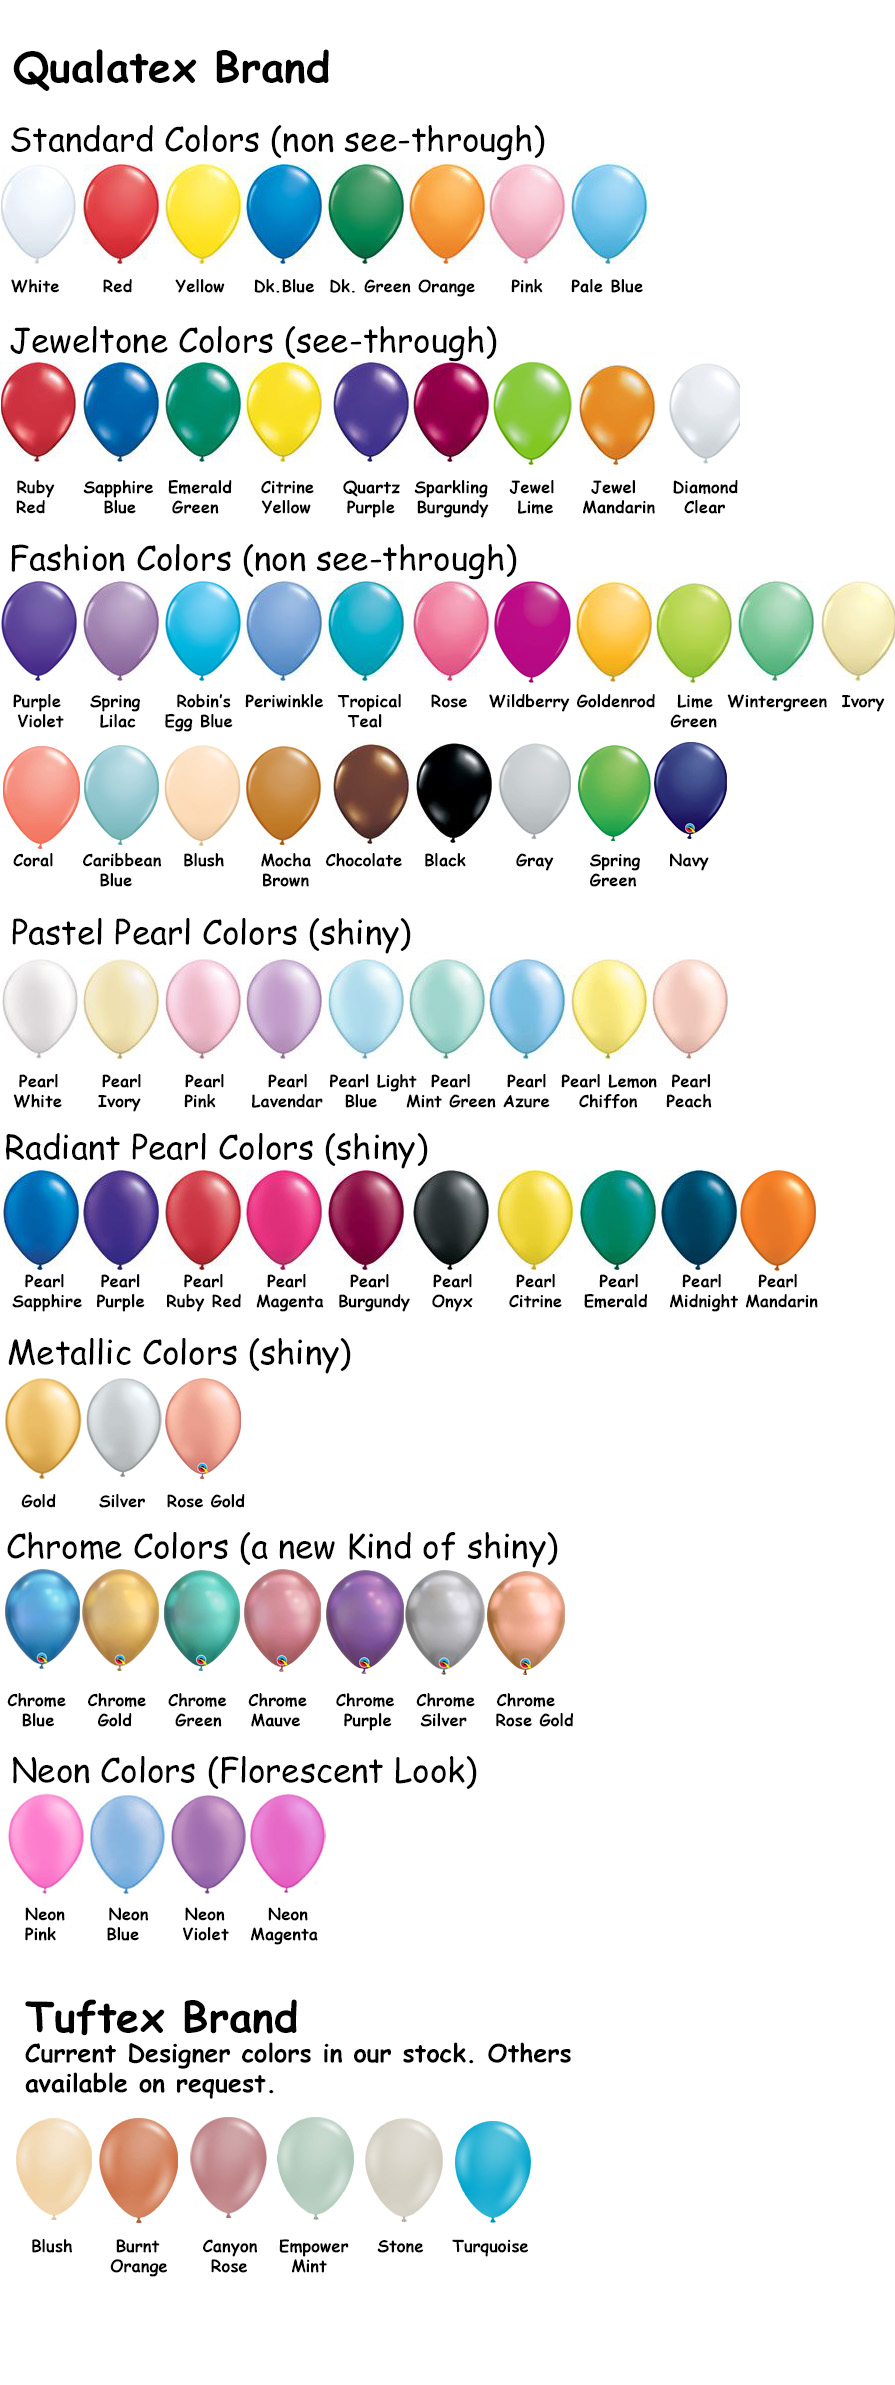 qualatex-color-chart-all-with-tuftex-110621.jpg